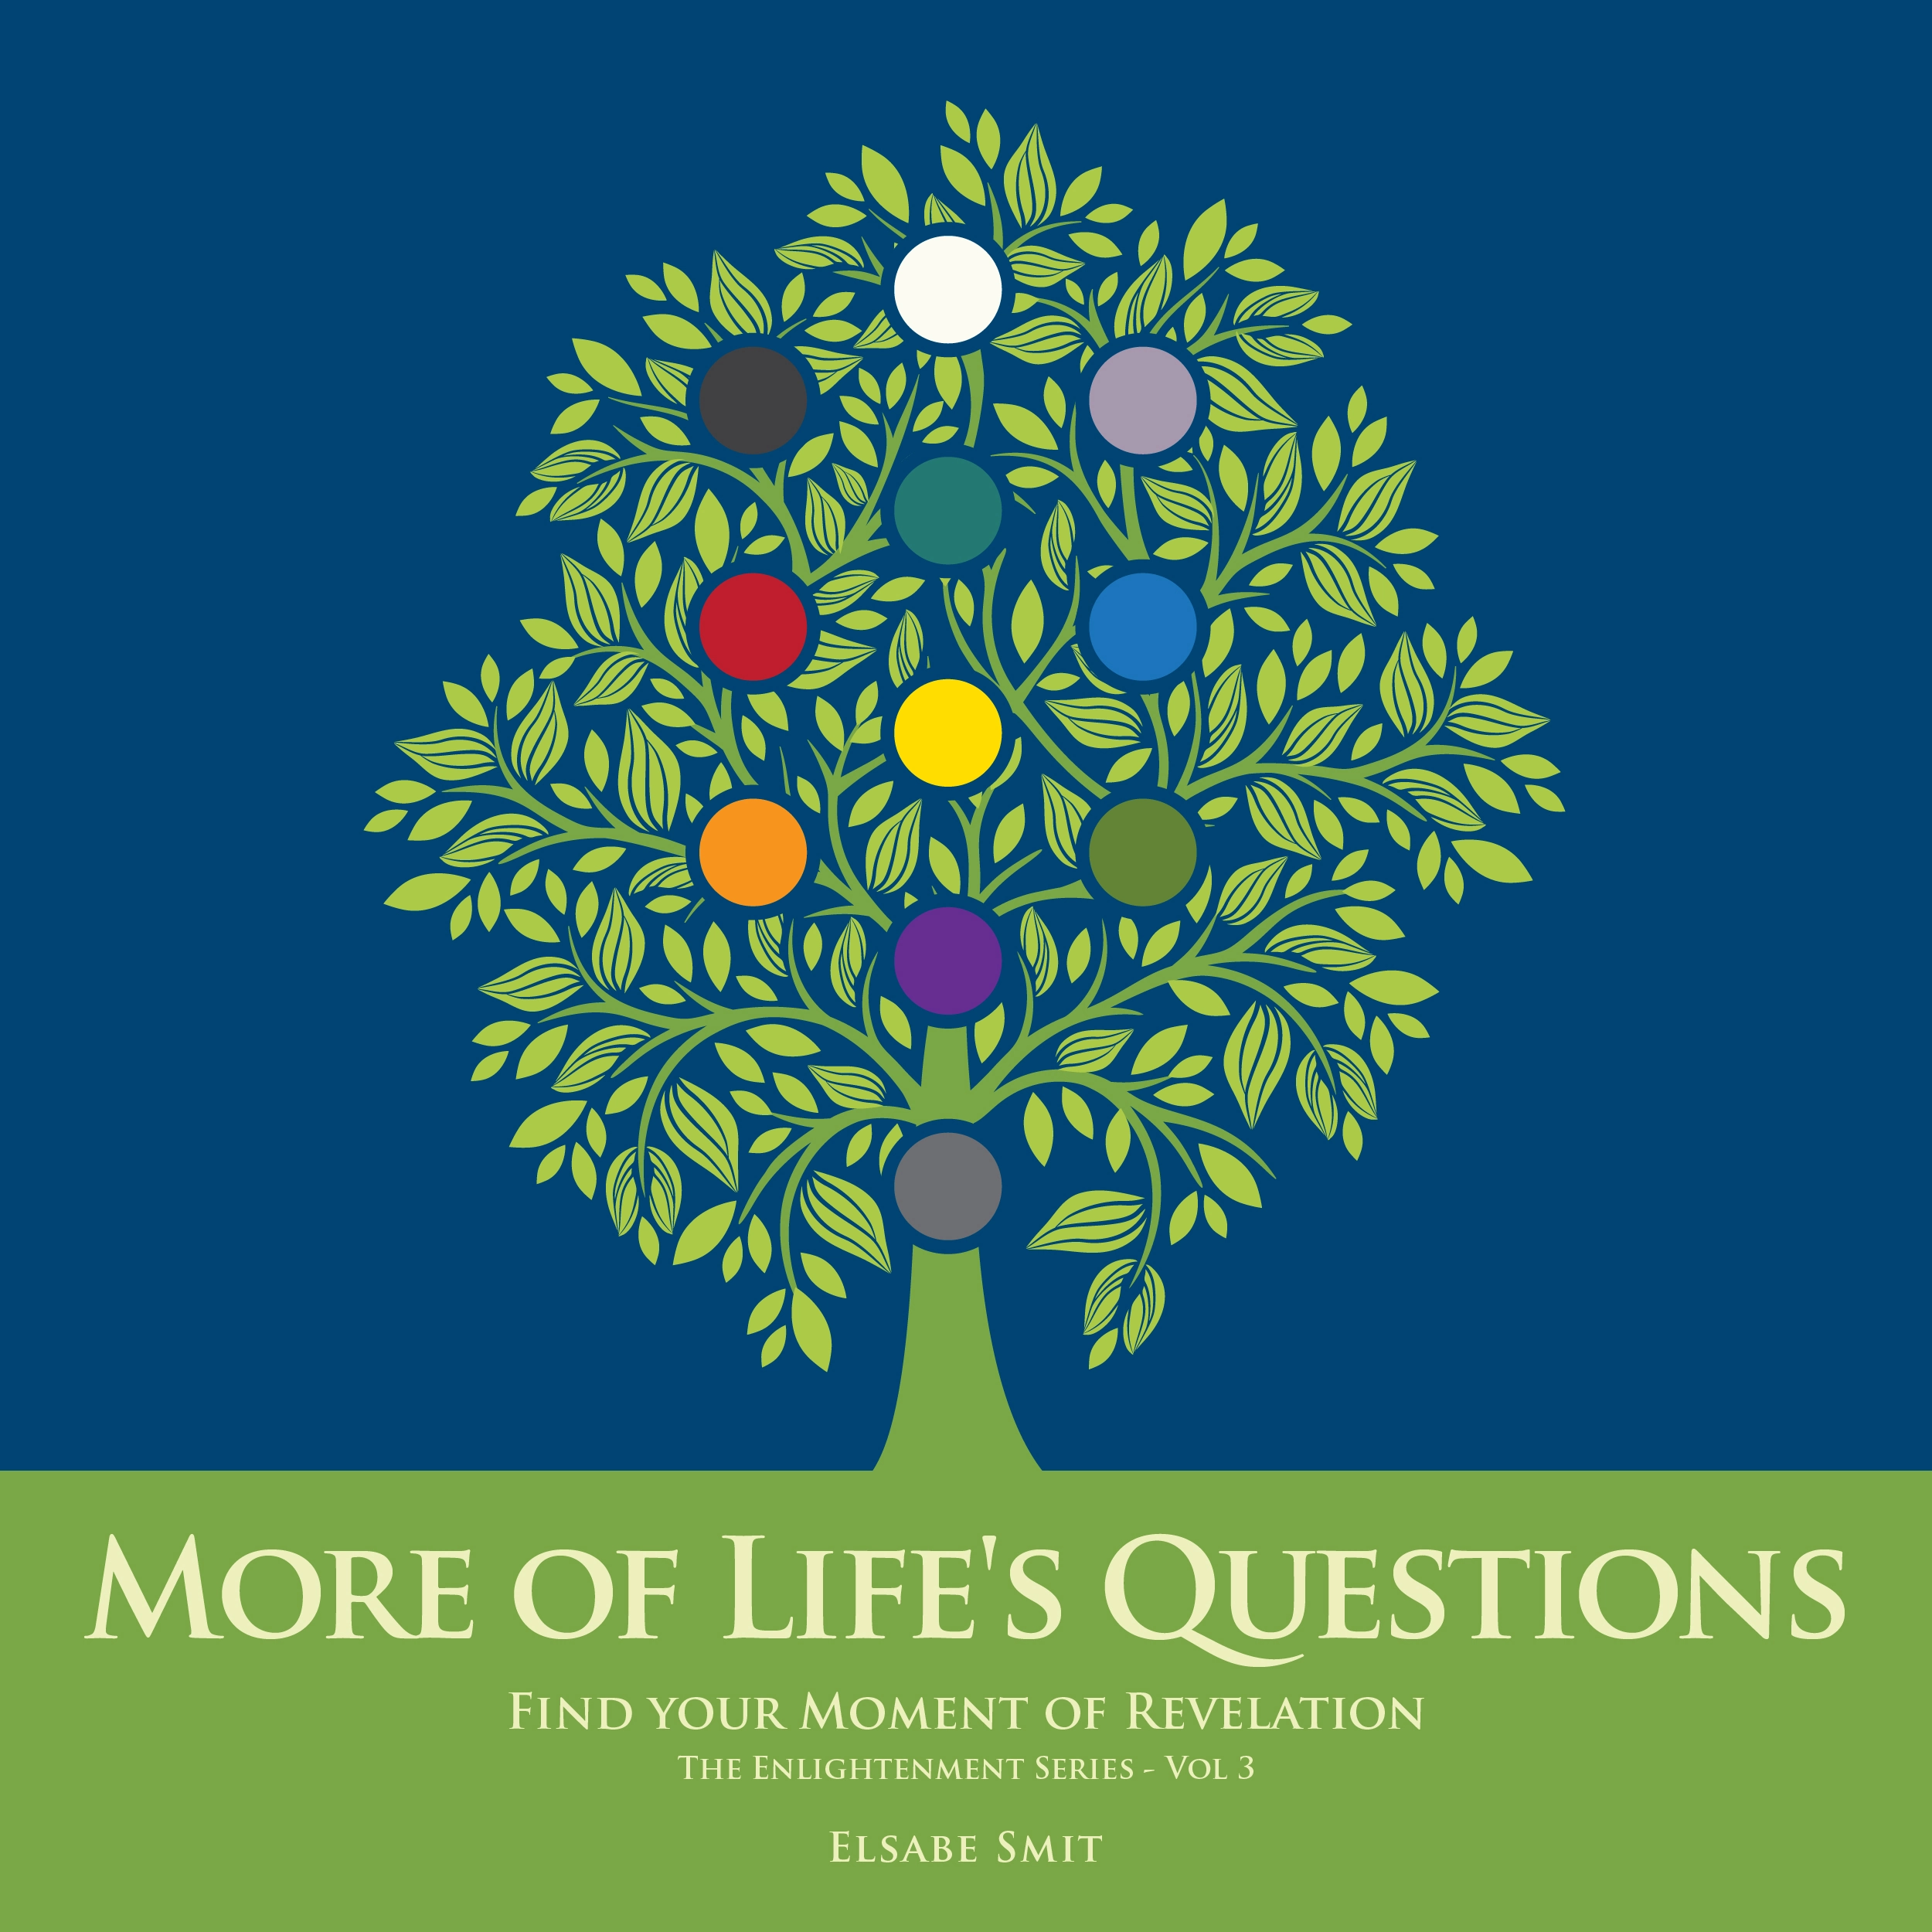 More of Life's Questions: Find Your Moment of Revelation (The Enlightenment Series Vol 3) Audiobook by Elsabe Smit